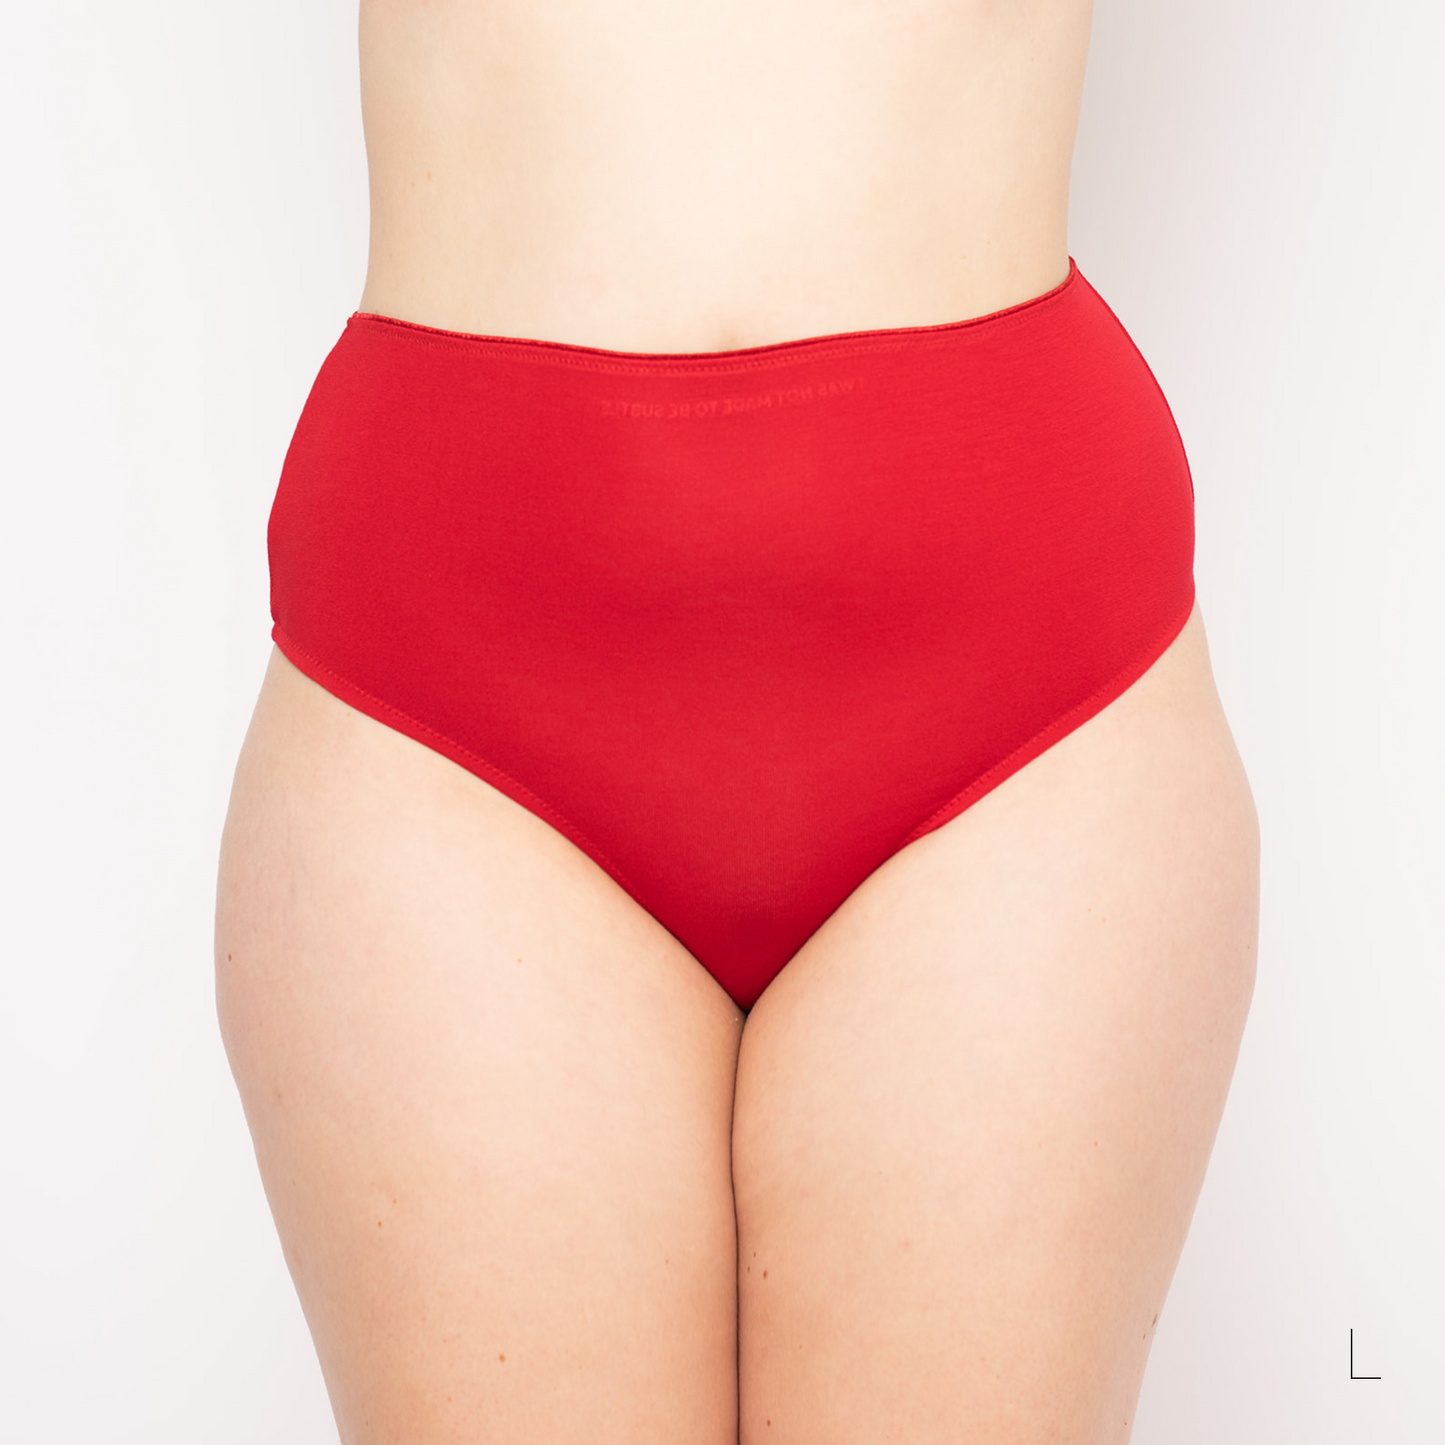 Lore Janssens Oh Yaz Red High Waisted String Oxygen Collection breathable underwear comfortable Red high waist hi waist string thong healthy underwear cotton ecovero vaginal irritation ohyaz